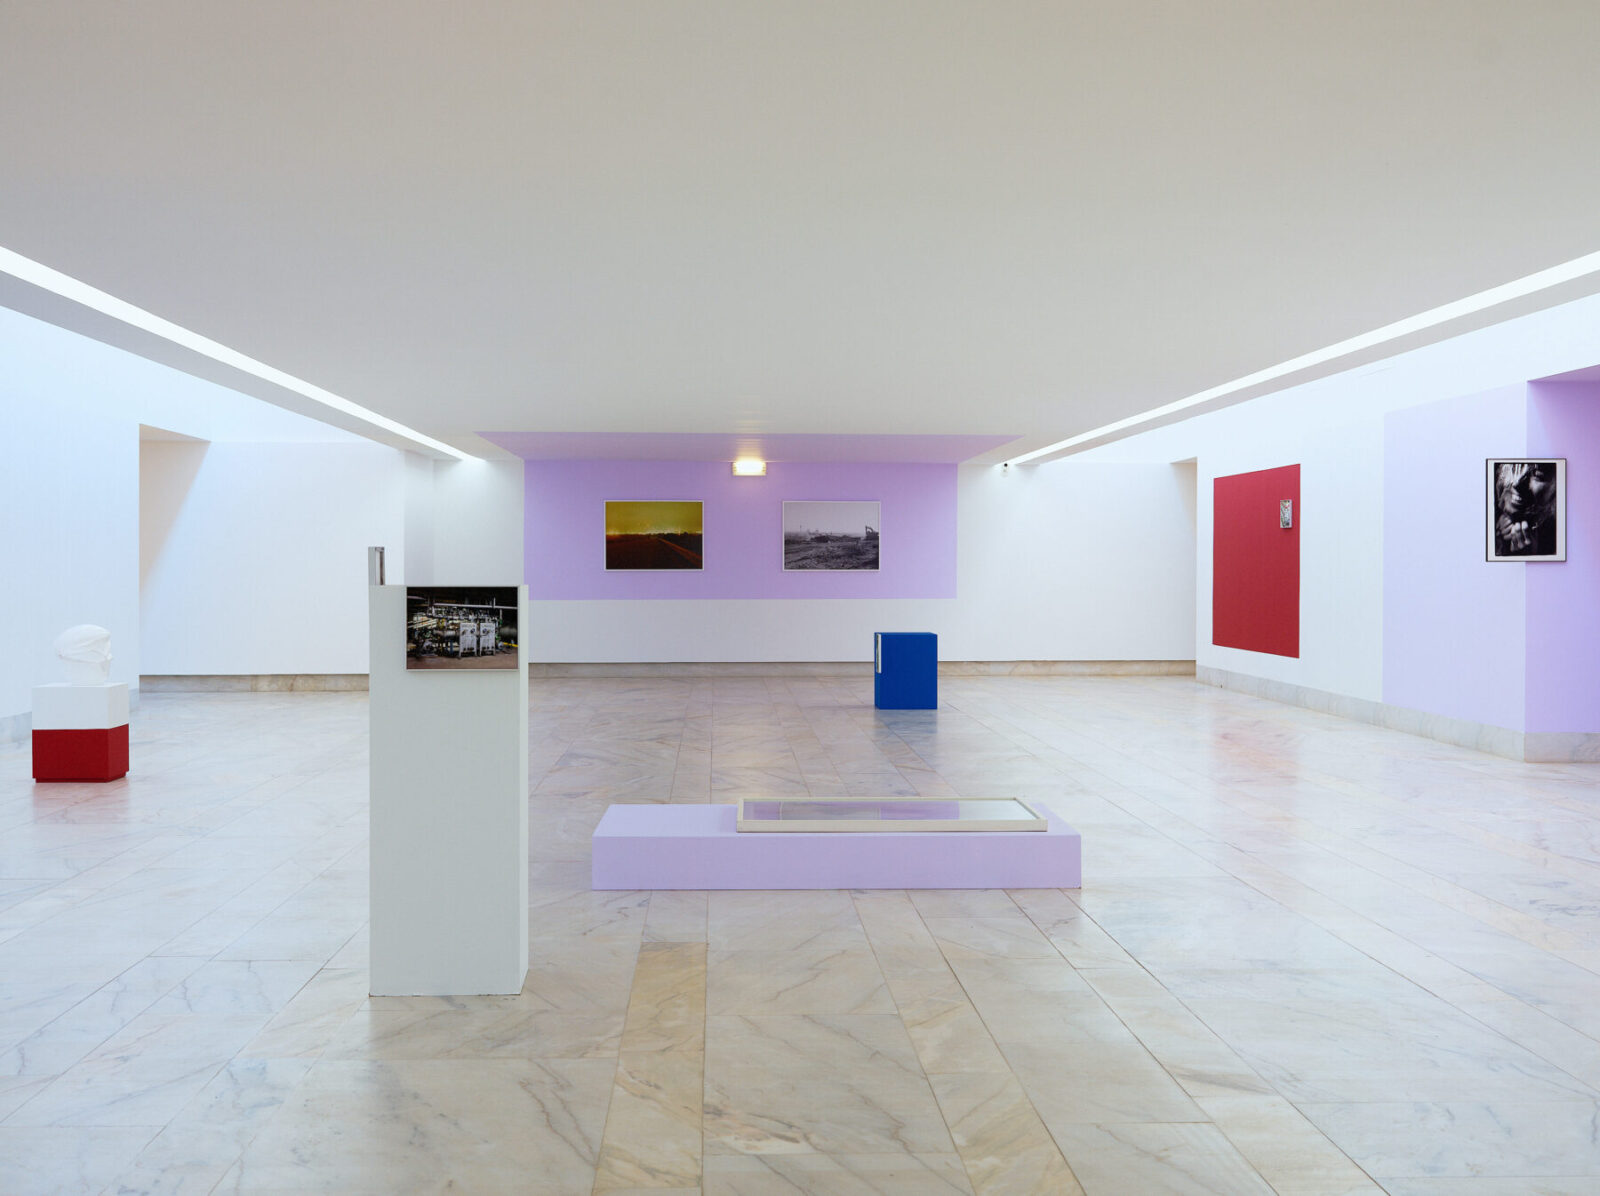 Archisearch BUREAU colourfully designed the world of 'Distant Lights' - Nuno Cera's solo exhibition in Sines Arts Centre, Portugal